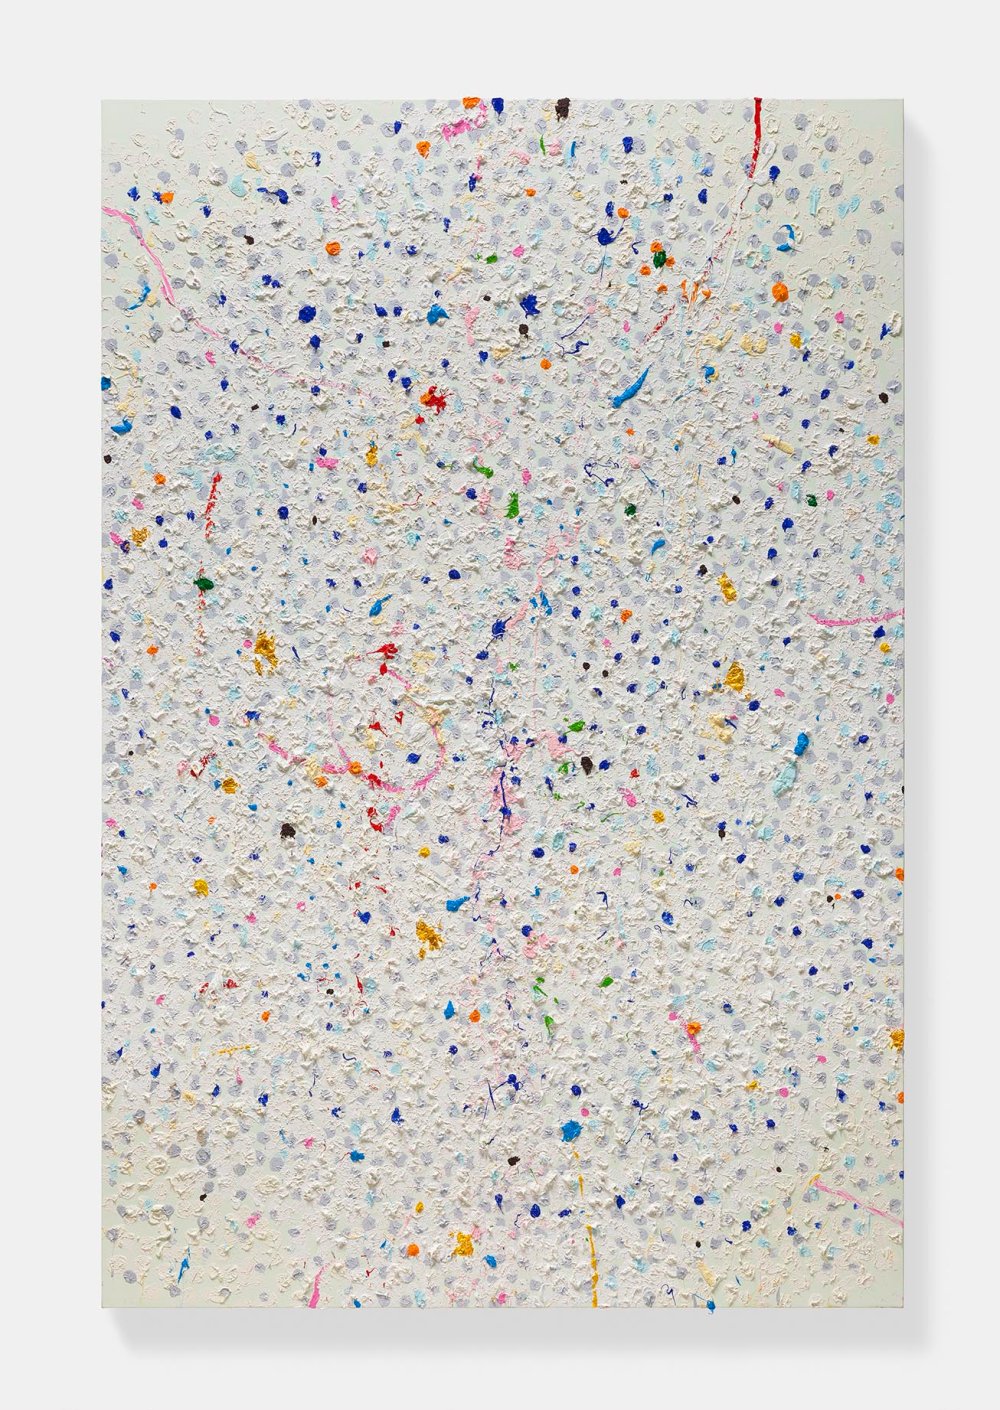 Damien Hirst, Lord, 2020